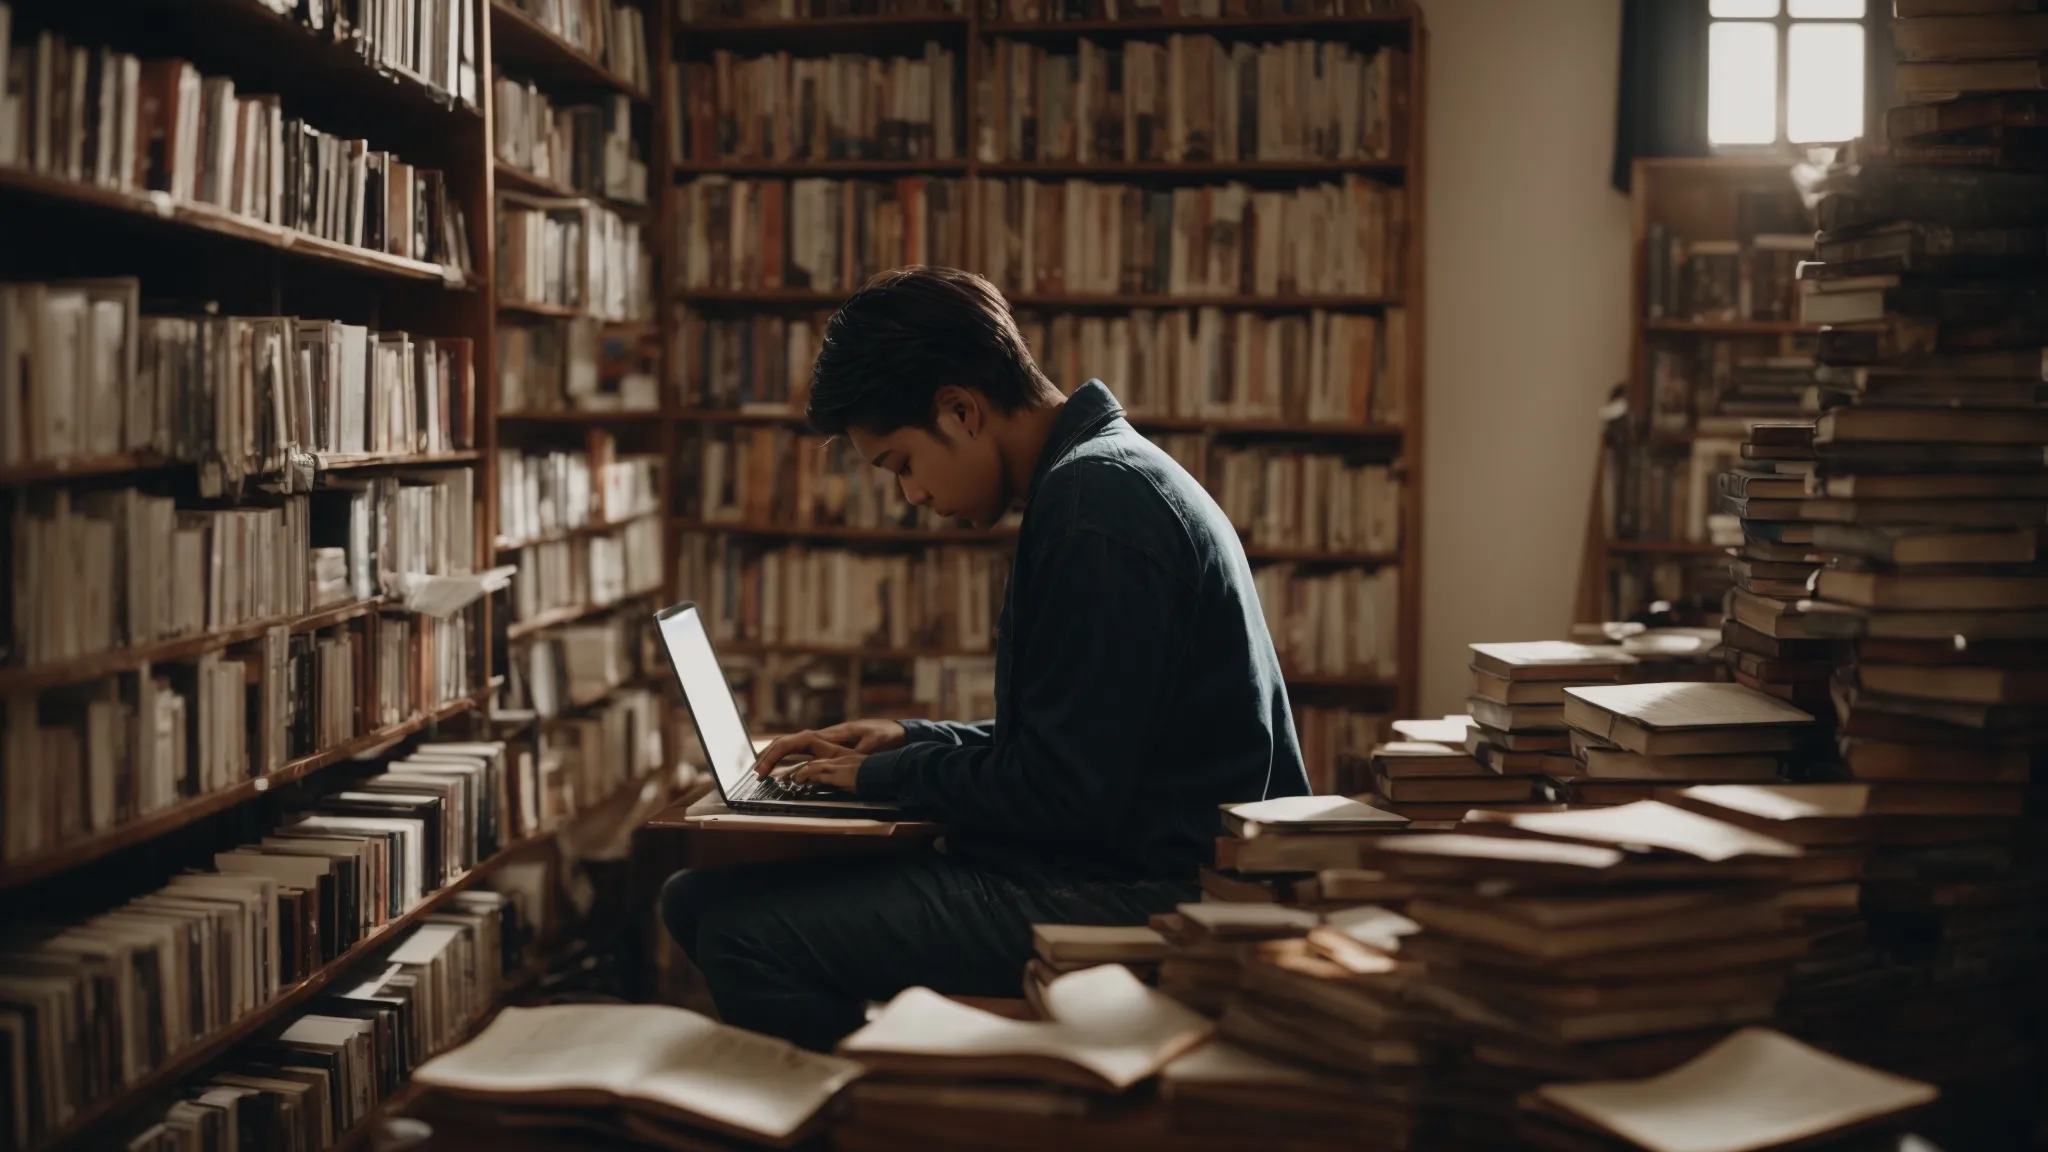 a person typing on a laptop amidst a stack of books, reflecting focused content creation.